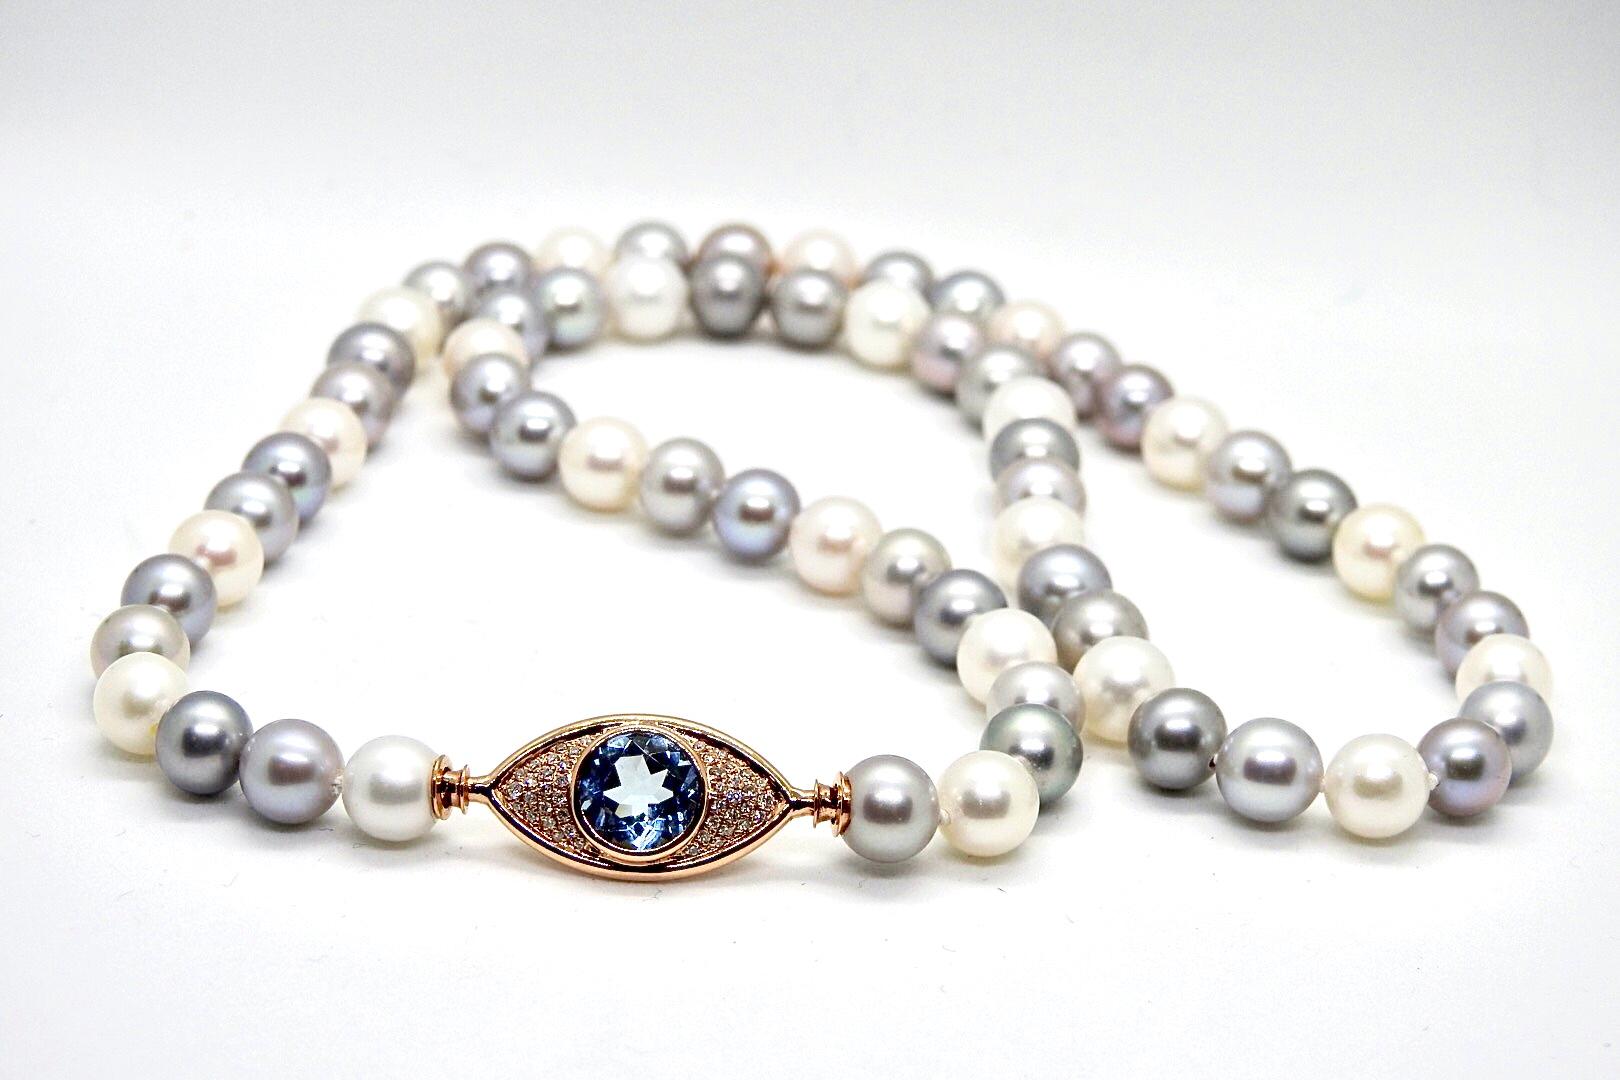 Contemporary Pearls Necklace with 18 Karat Gold, Diamonds and Swiss Blue Topaz Eye Clasp For Sale